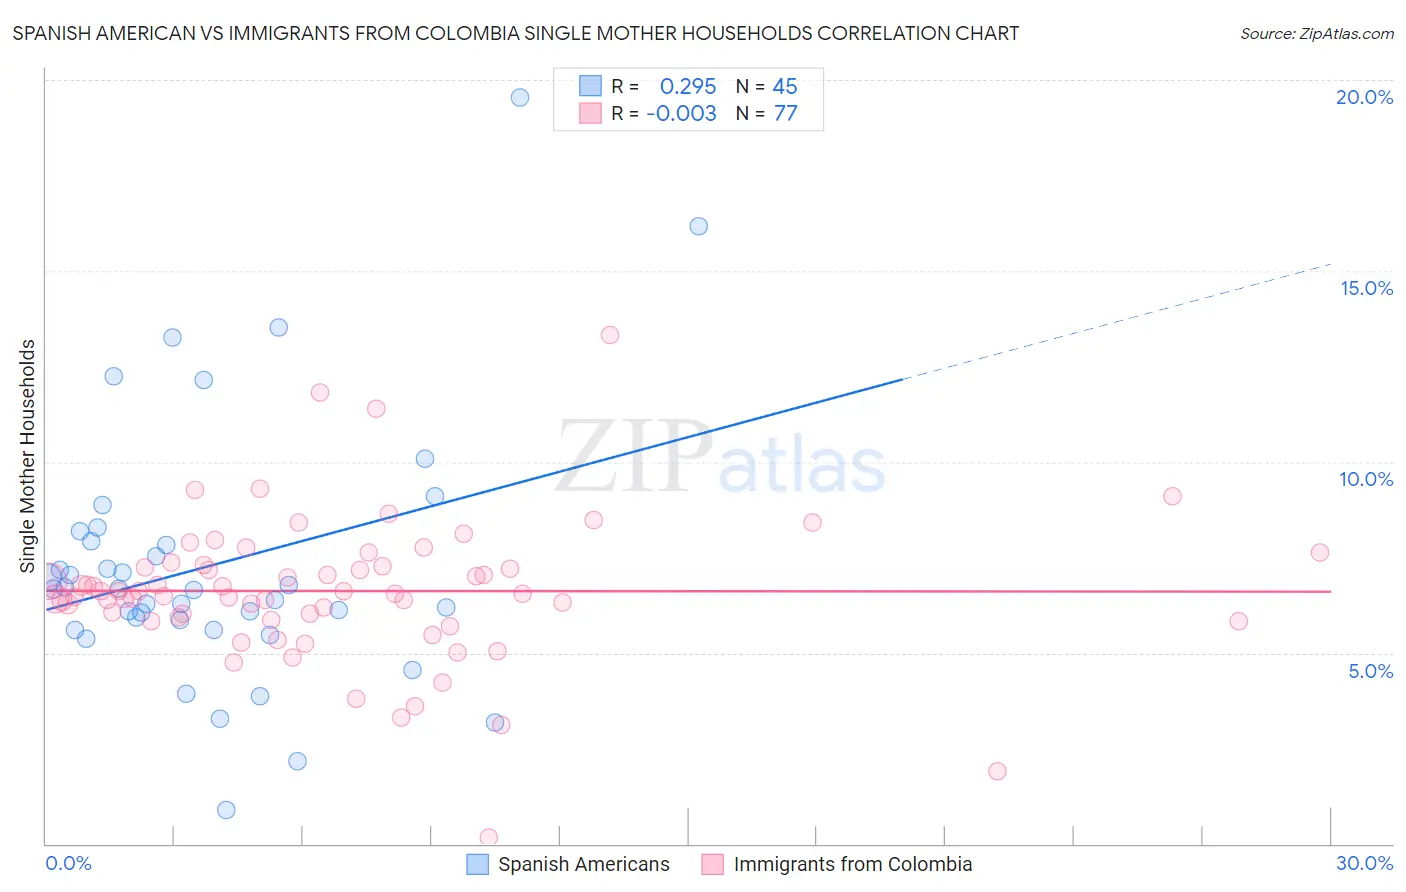 Spanish American vs Immigrants from Colombia Single Mother Households